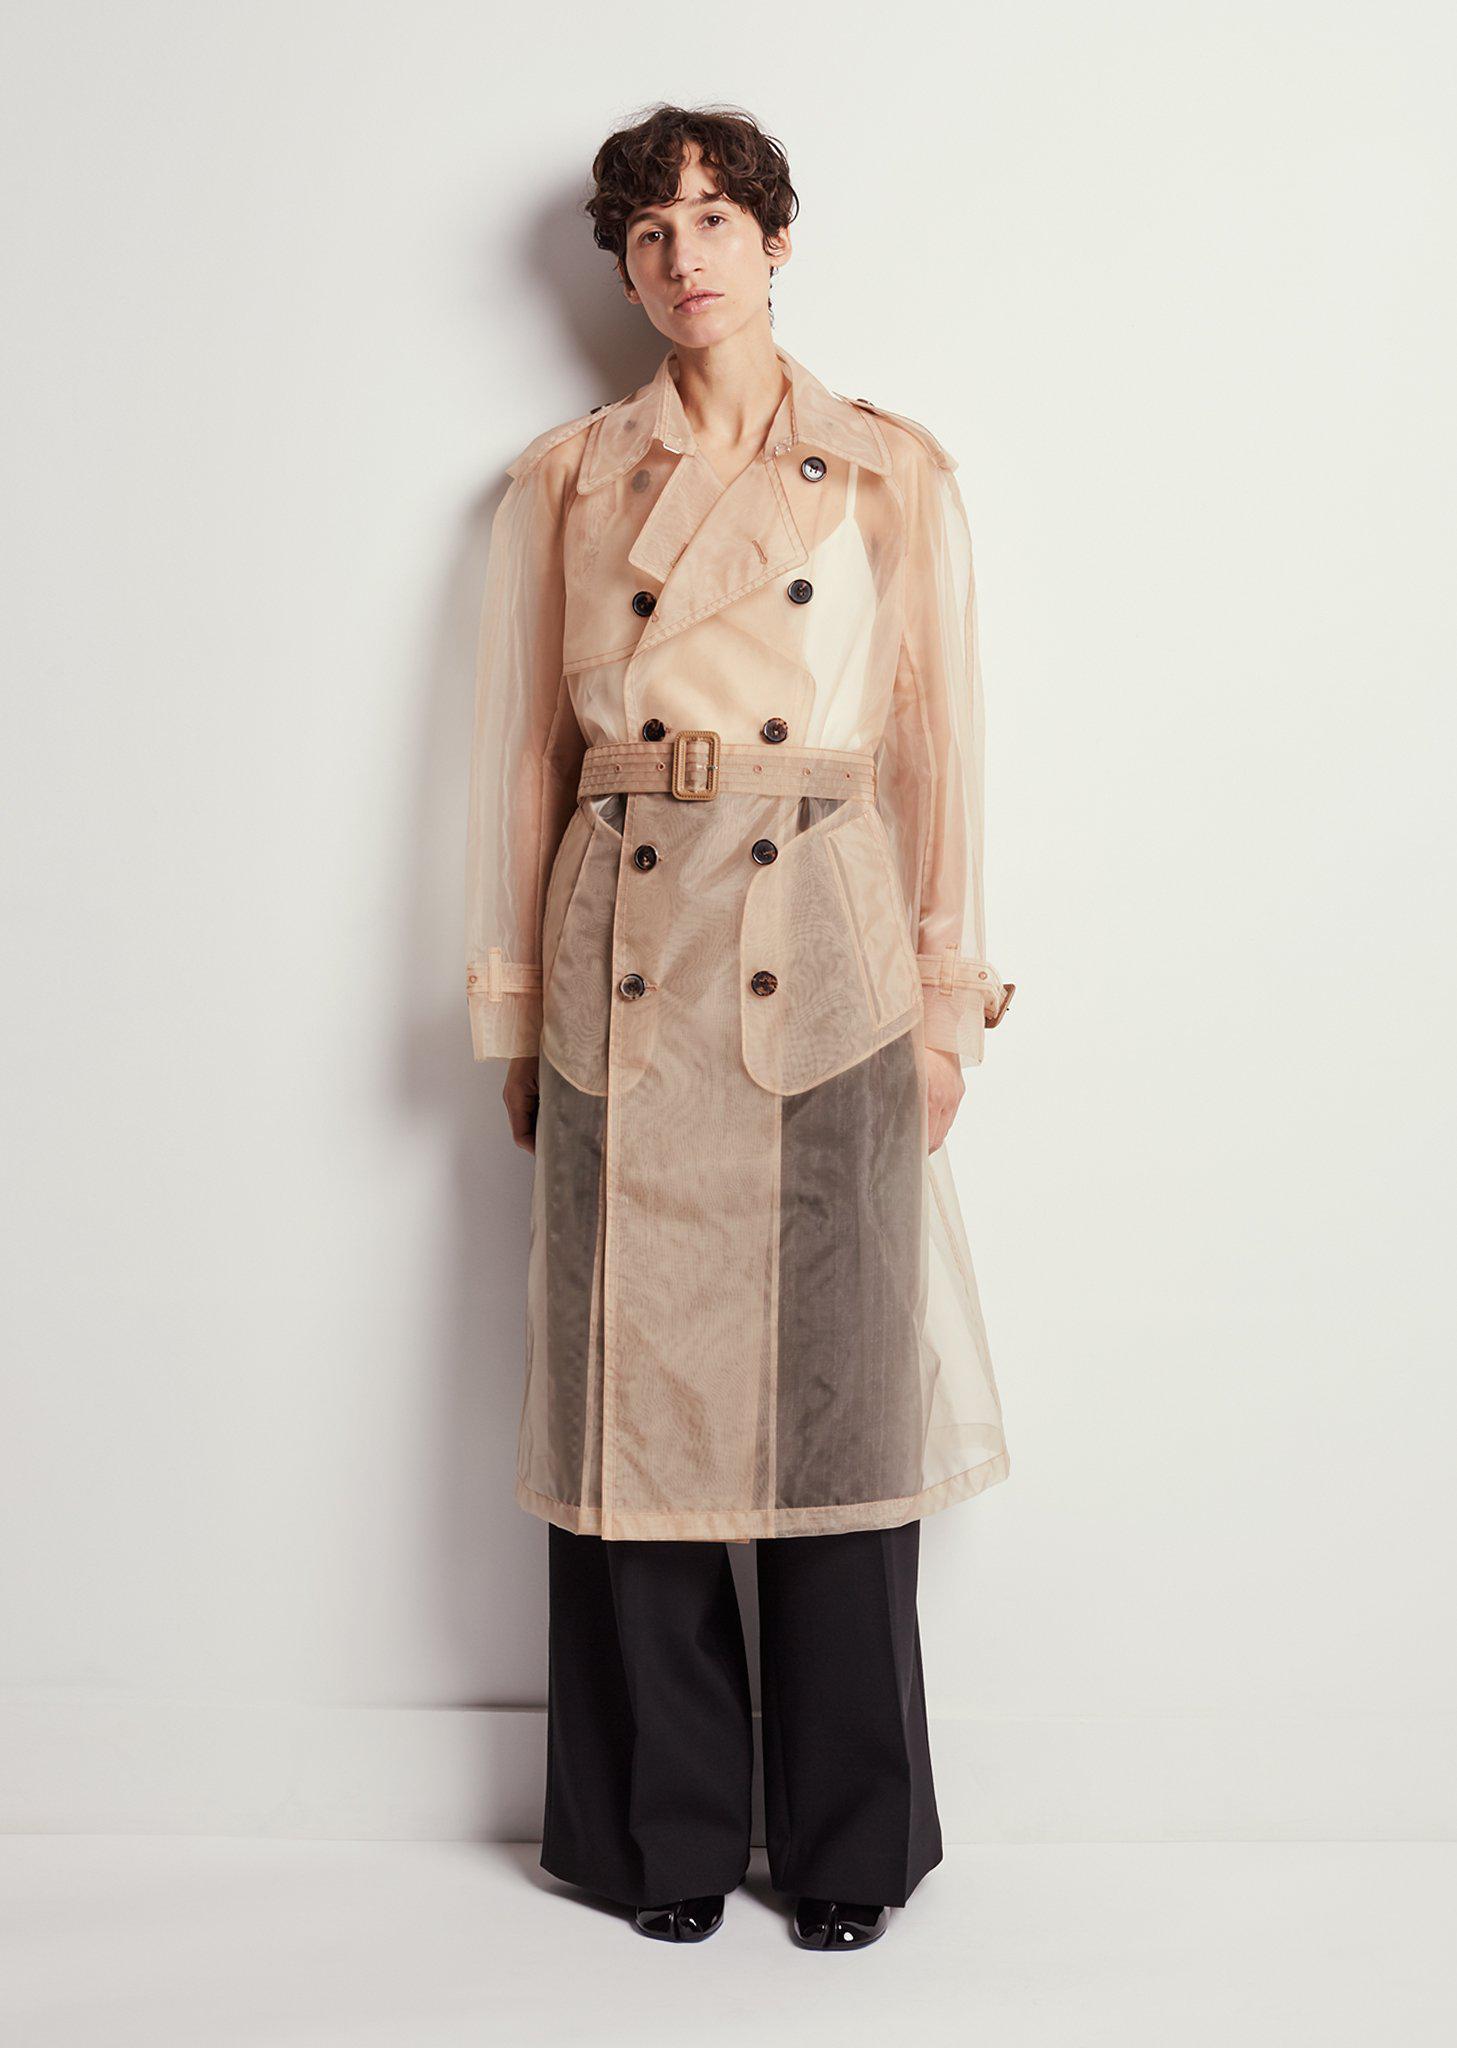 Maison Margiela Organza Trench Coat in Natural | Lyst Canada